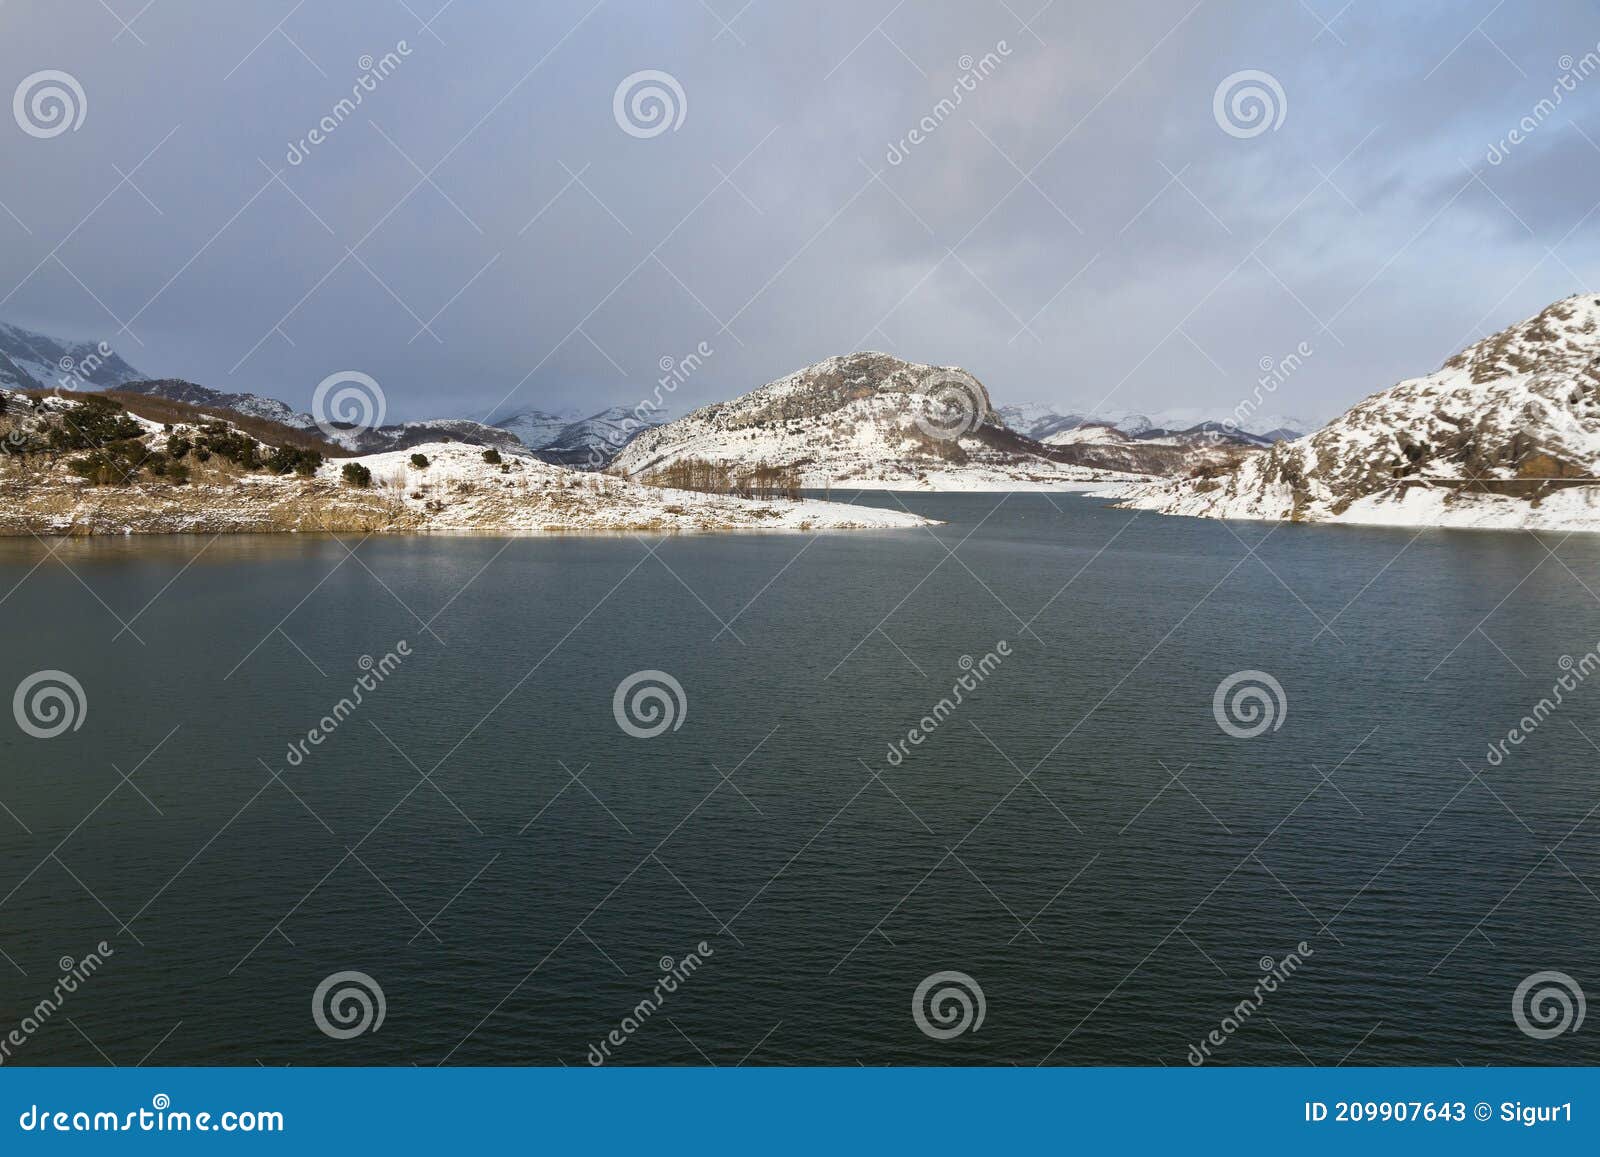 porma reservoir with snow mountains